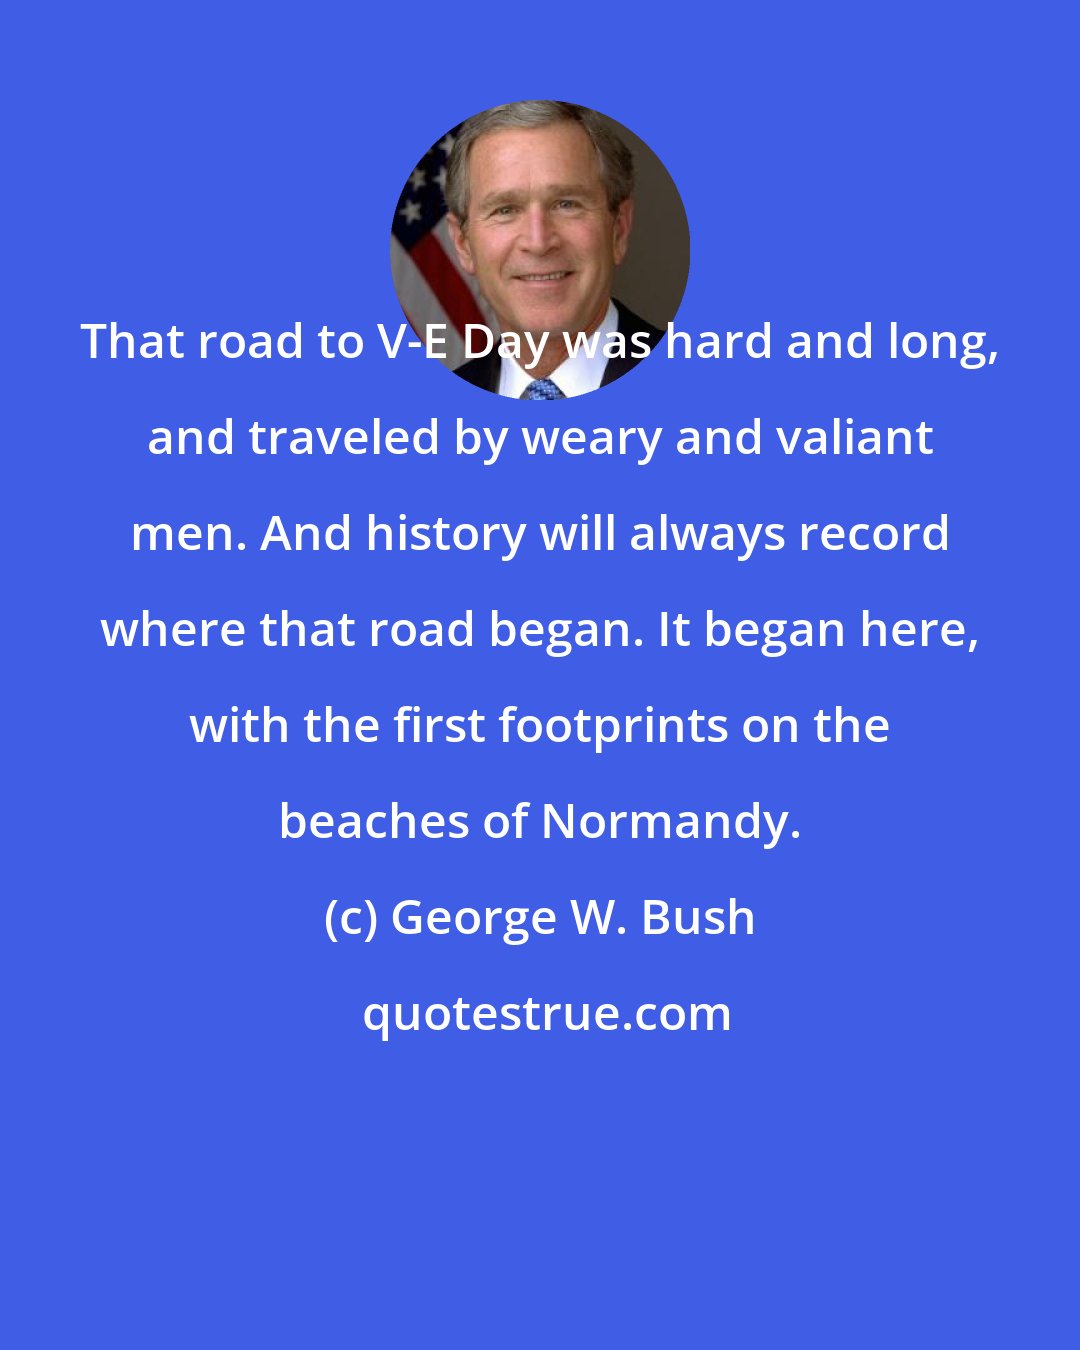 George W. Bush: That road to V-E Day was hard and long, and traveled by weary and valiant men. And history will always record where that road began. It began here, with the first footprints on the beaches of Normandy.